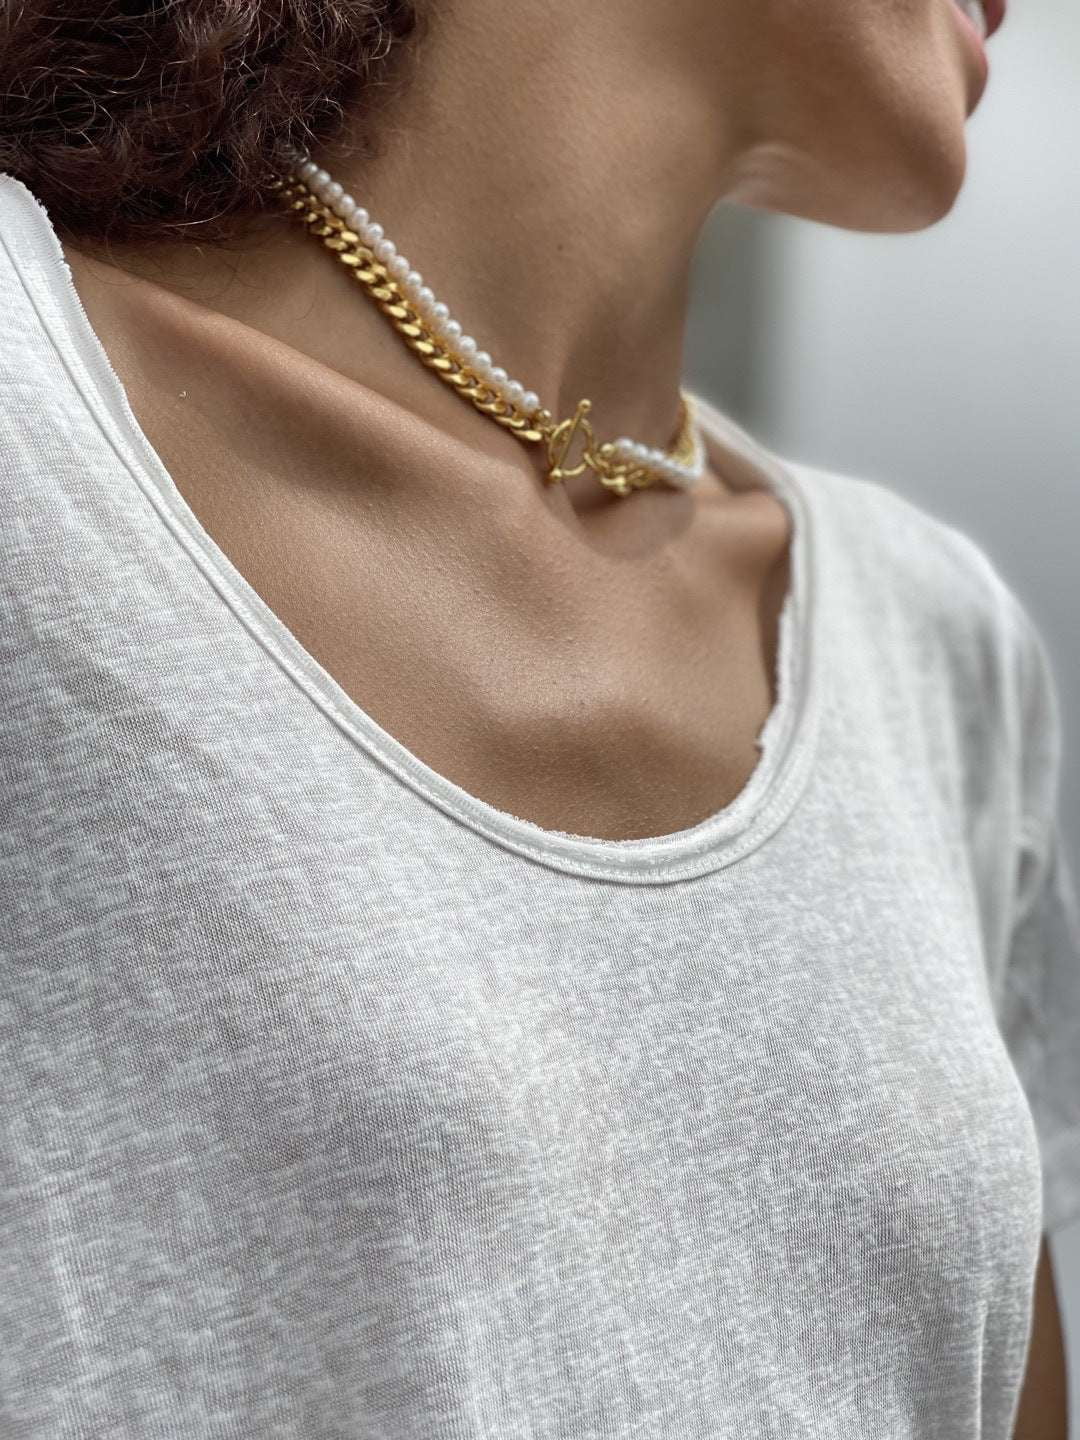 Cuban Link Chain Necklace, Freshwater Pearl Clavicle Chain, Gold Plating Pearl Necklace - available at Sparq Mart